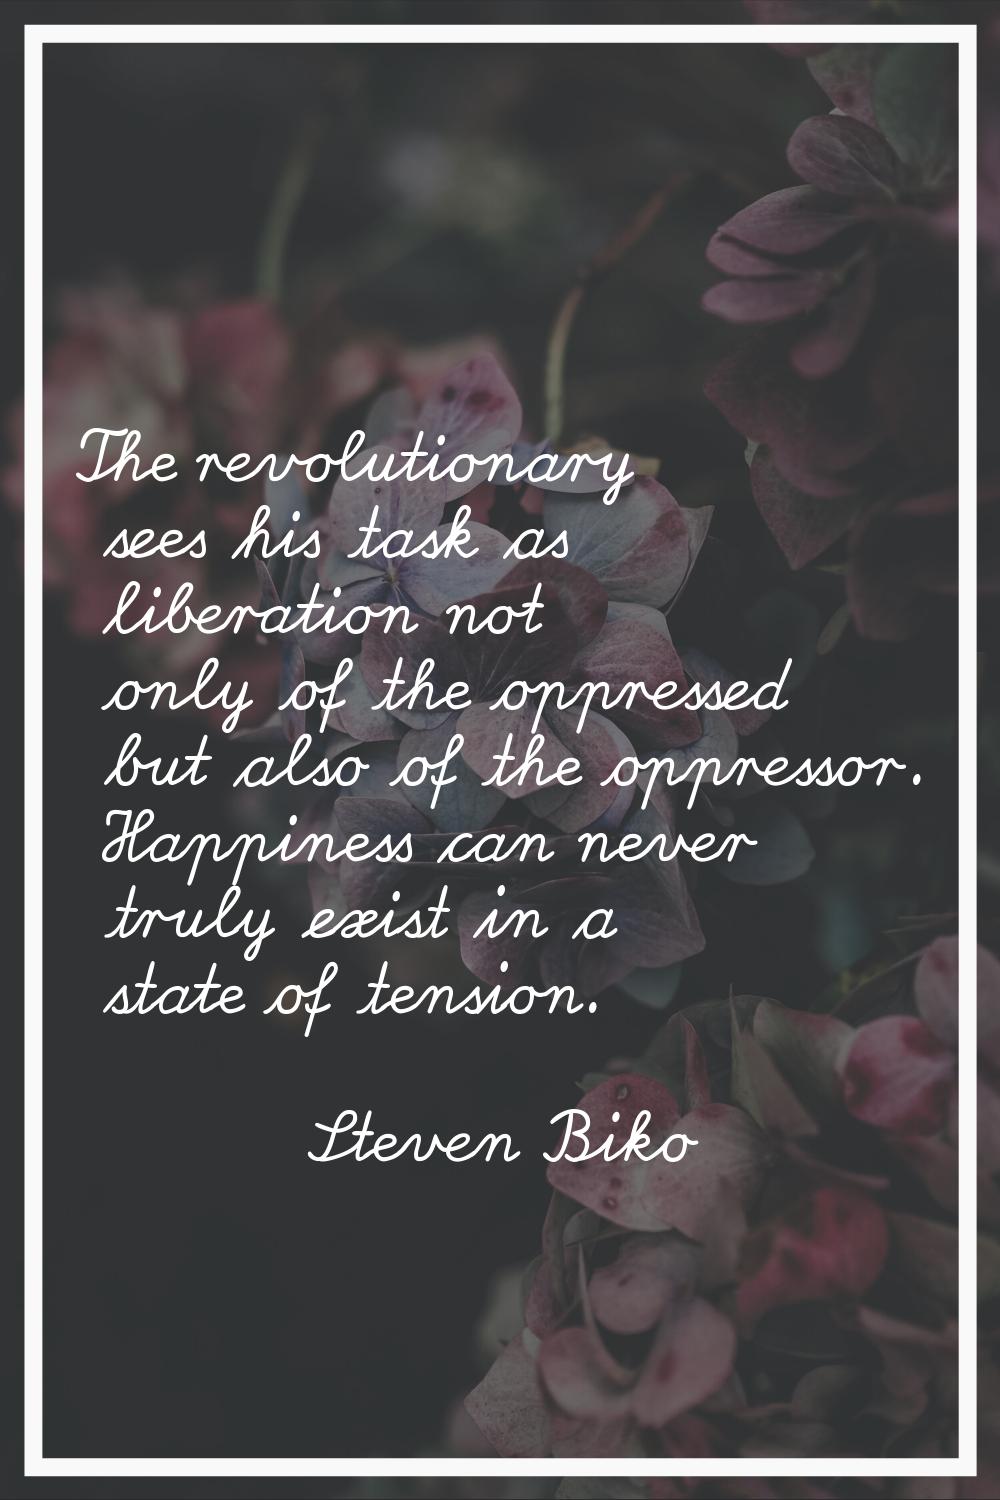 The revolutionary sees his task as liberation not only of the oppressed but also of the oppressor. 